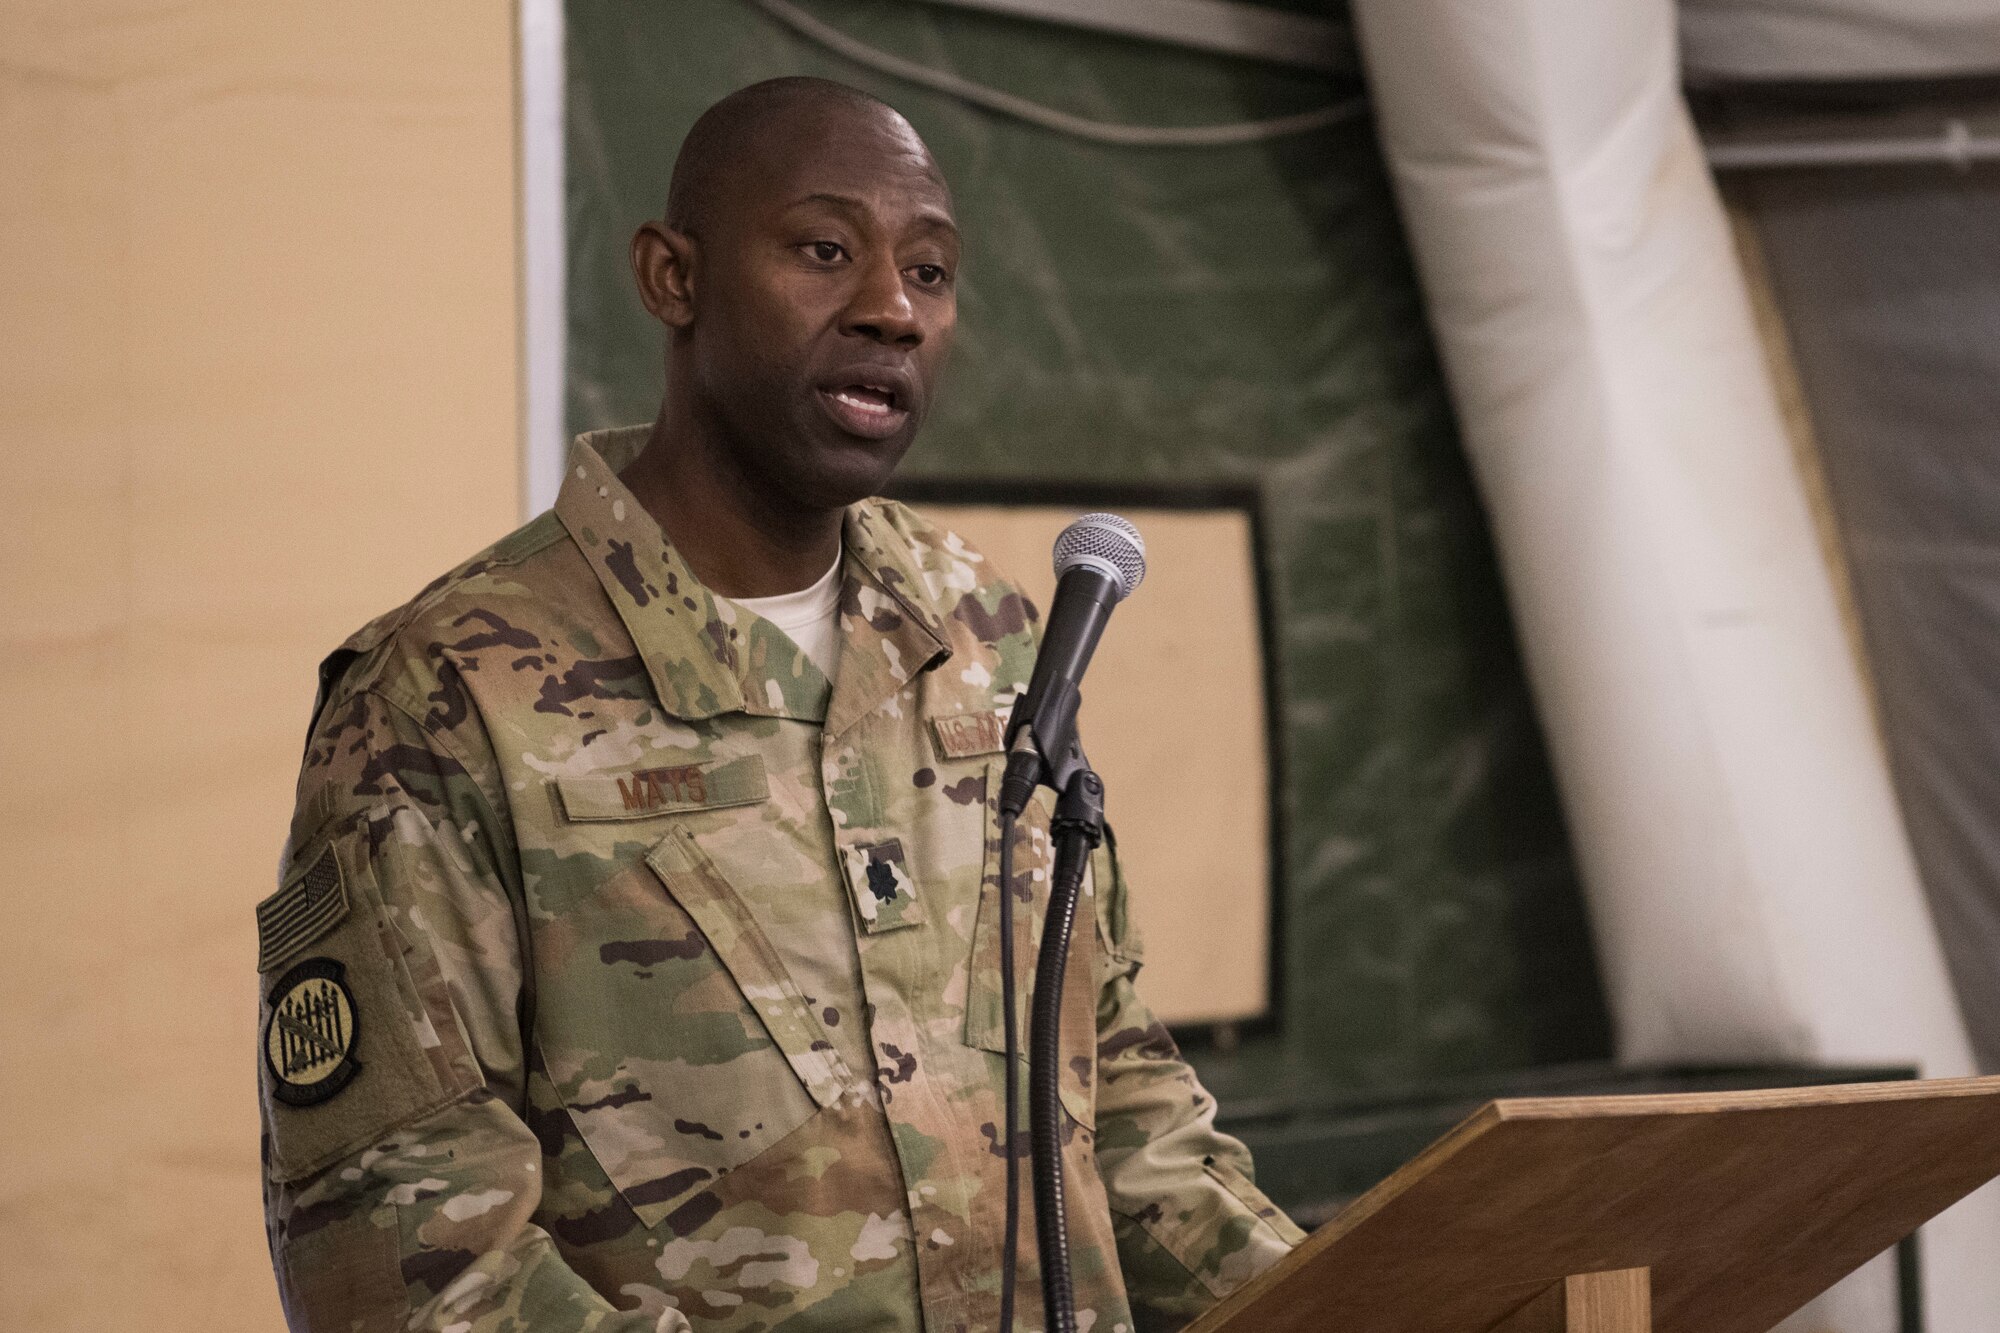 Lt. Col. Jamaal Mays, 332nd Expeditionary Logistical Readiness Squadron commander, speaks about resiliency during a breakfast the 332nd Air Expeditionary Wing held in observance of National Day of Prayer May 3, 2018, at an undisclosed location in Southwest Asia.